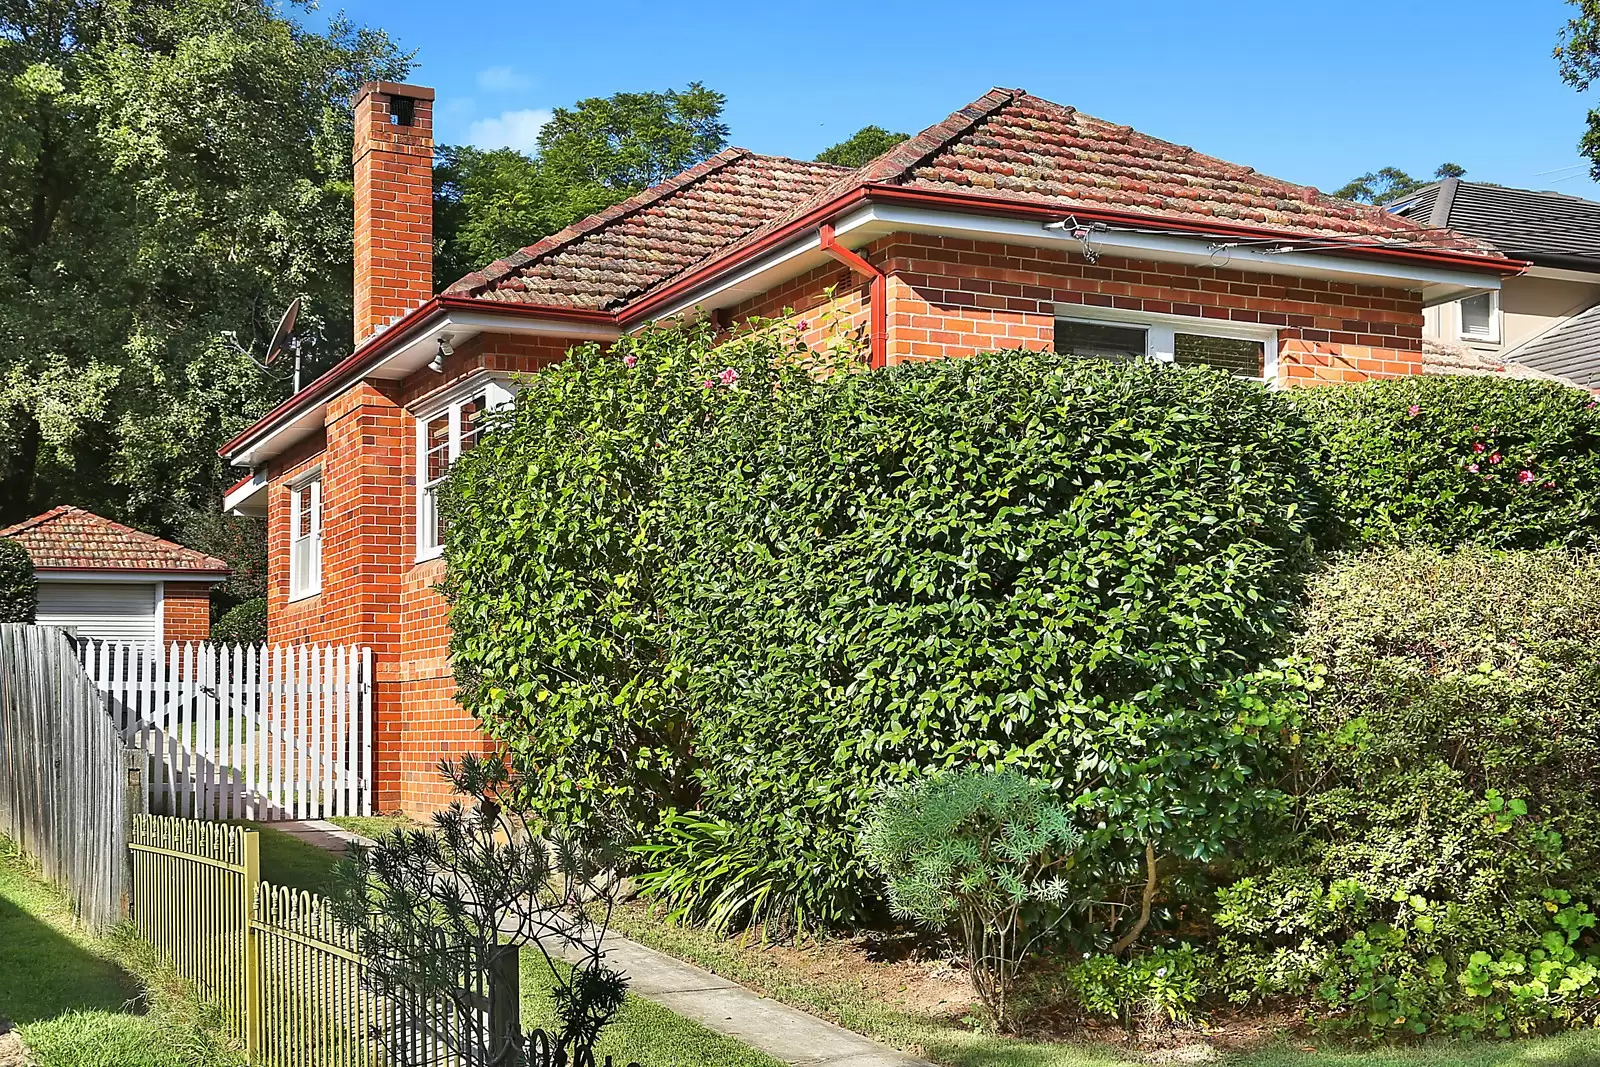 Photo #5: 33 Inverallan Avenue, West Pymble - Sold by Sydney Sotheby's International Realty